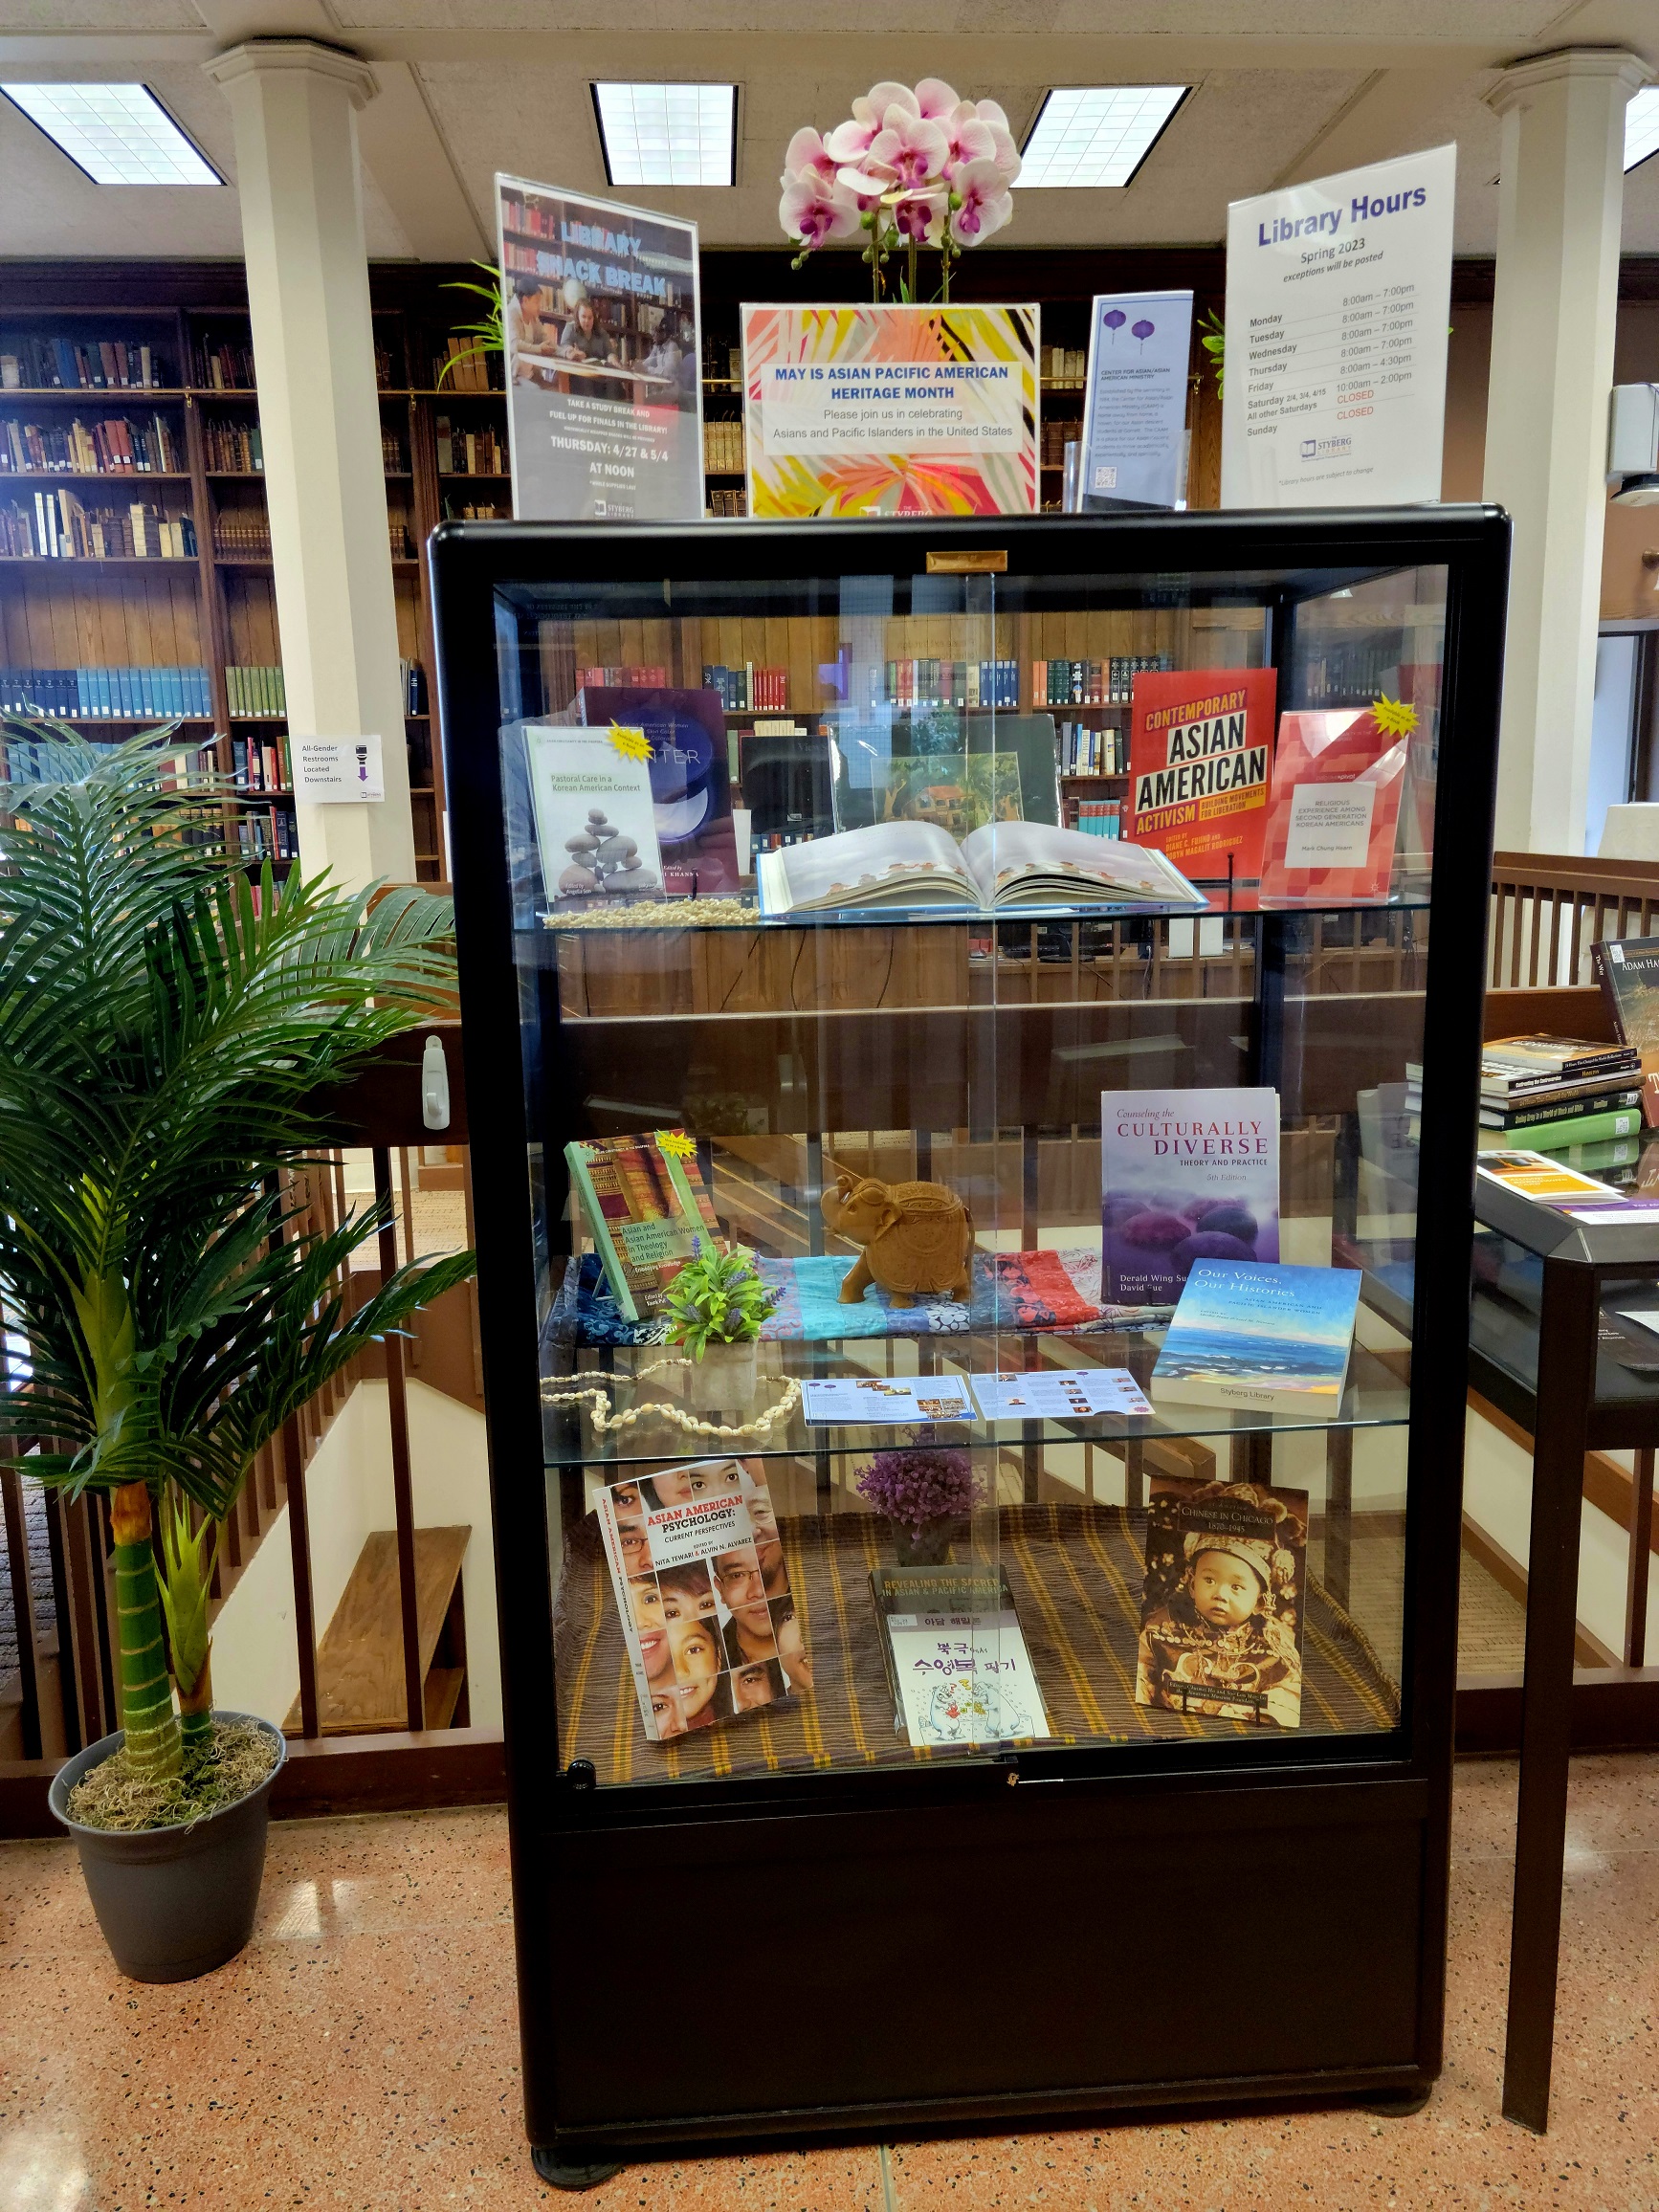 Asian American Heritage Month Display in the Library